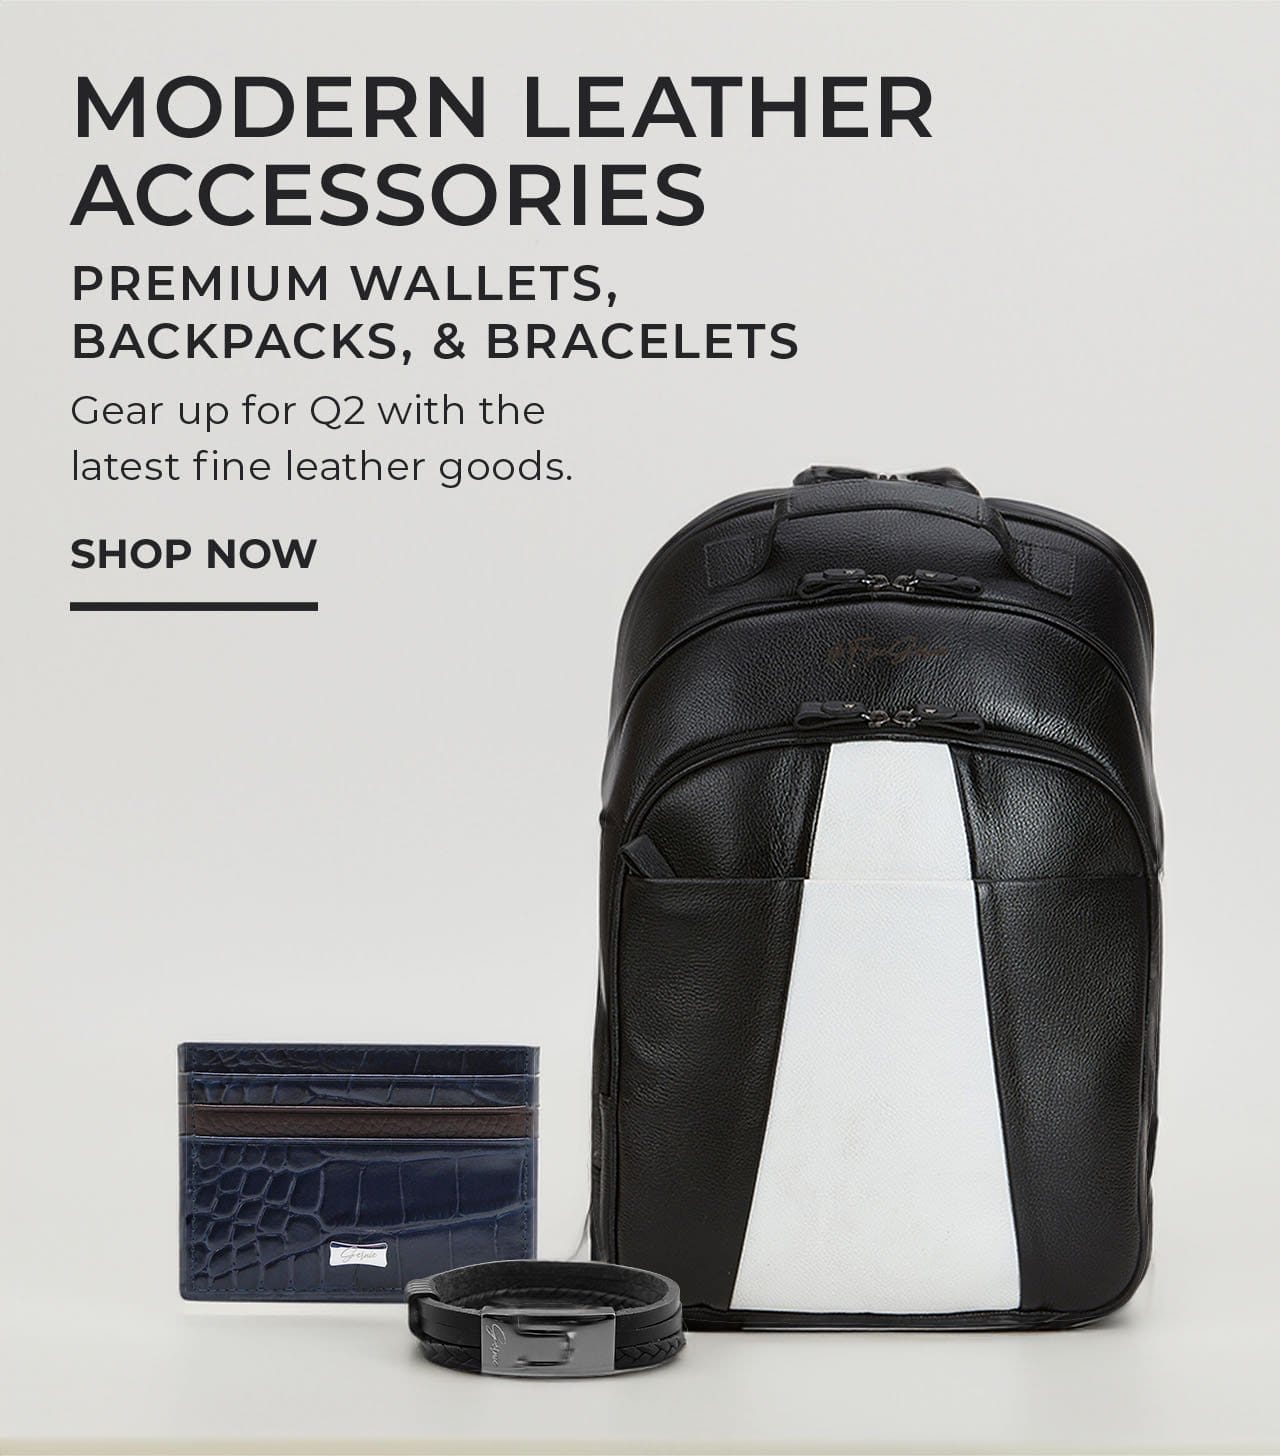 Modern Leather Accessories | SHOP NOW